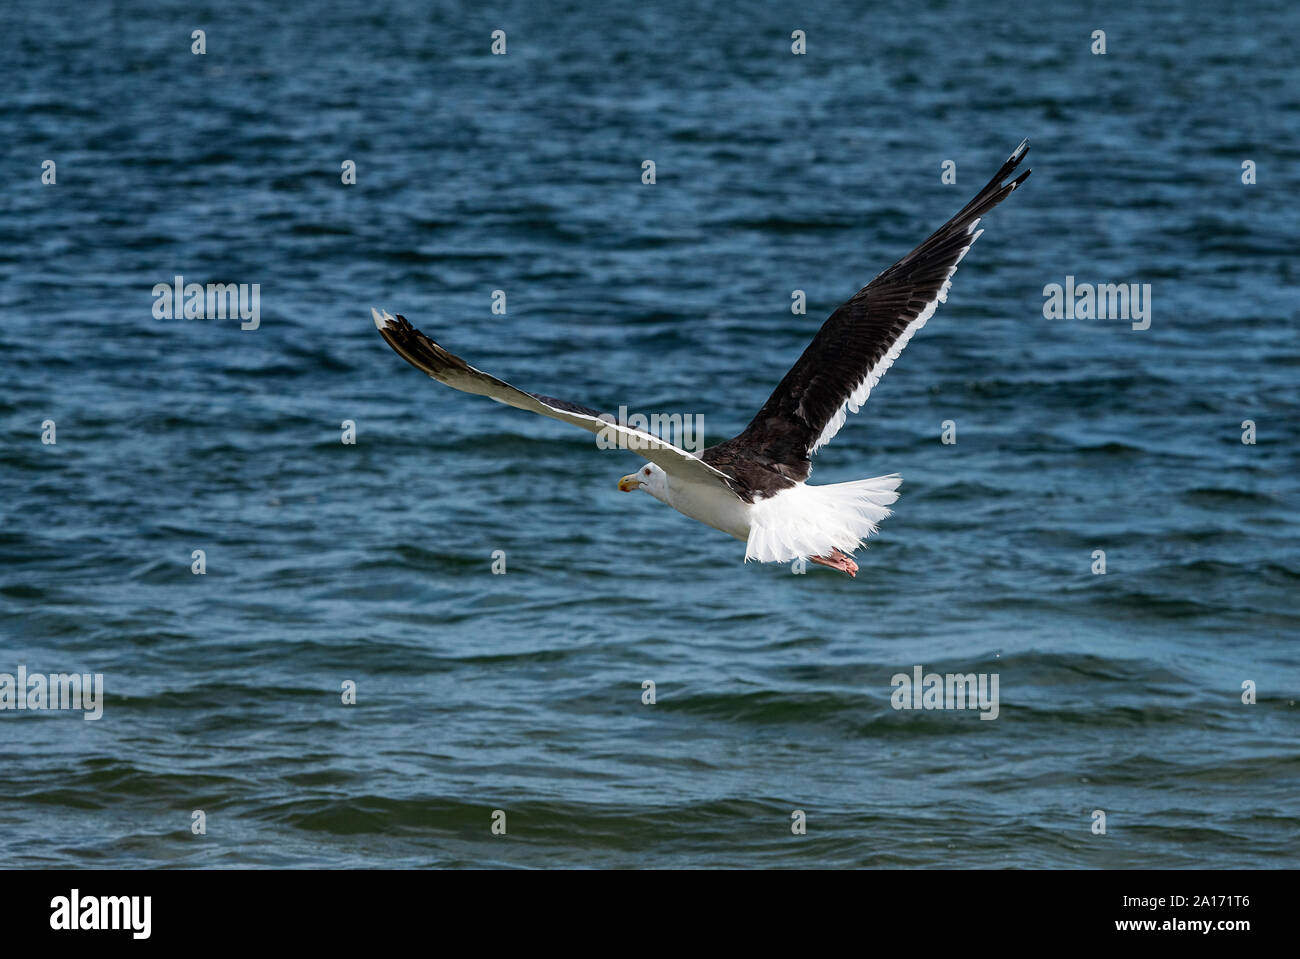 Seagull flying above ocean water in search of food, Cape Cod, Massachusetts, USA. Stock Photo